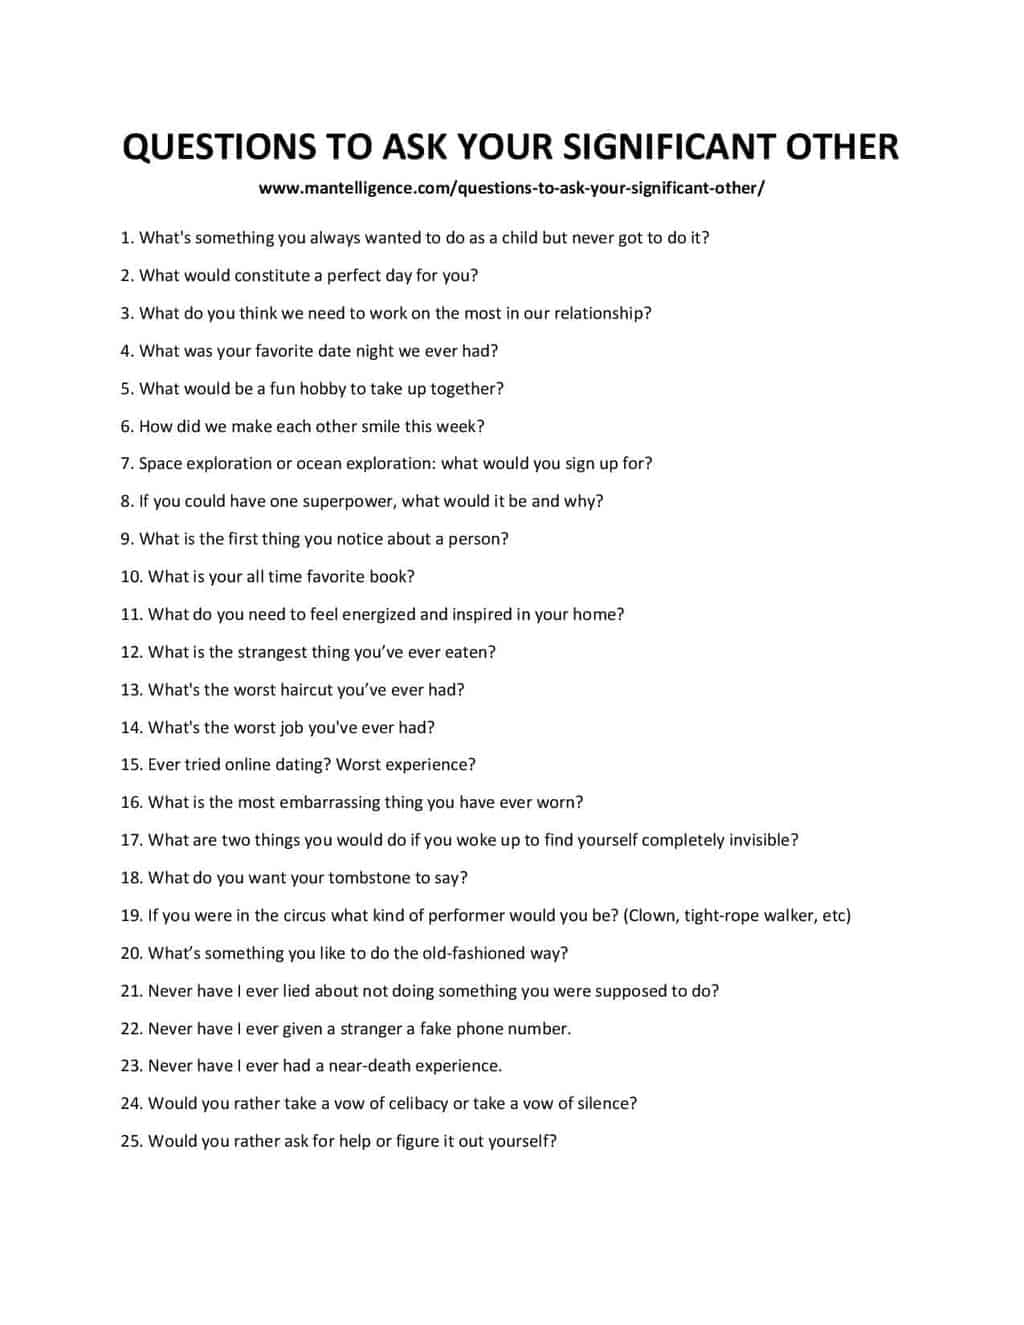 downloadable and printable list of QUESTIONS TO ASK YOUR SIGNIFICANT OTHER